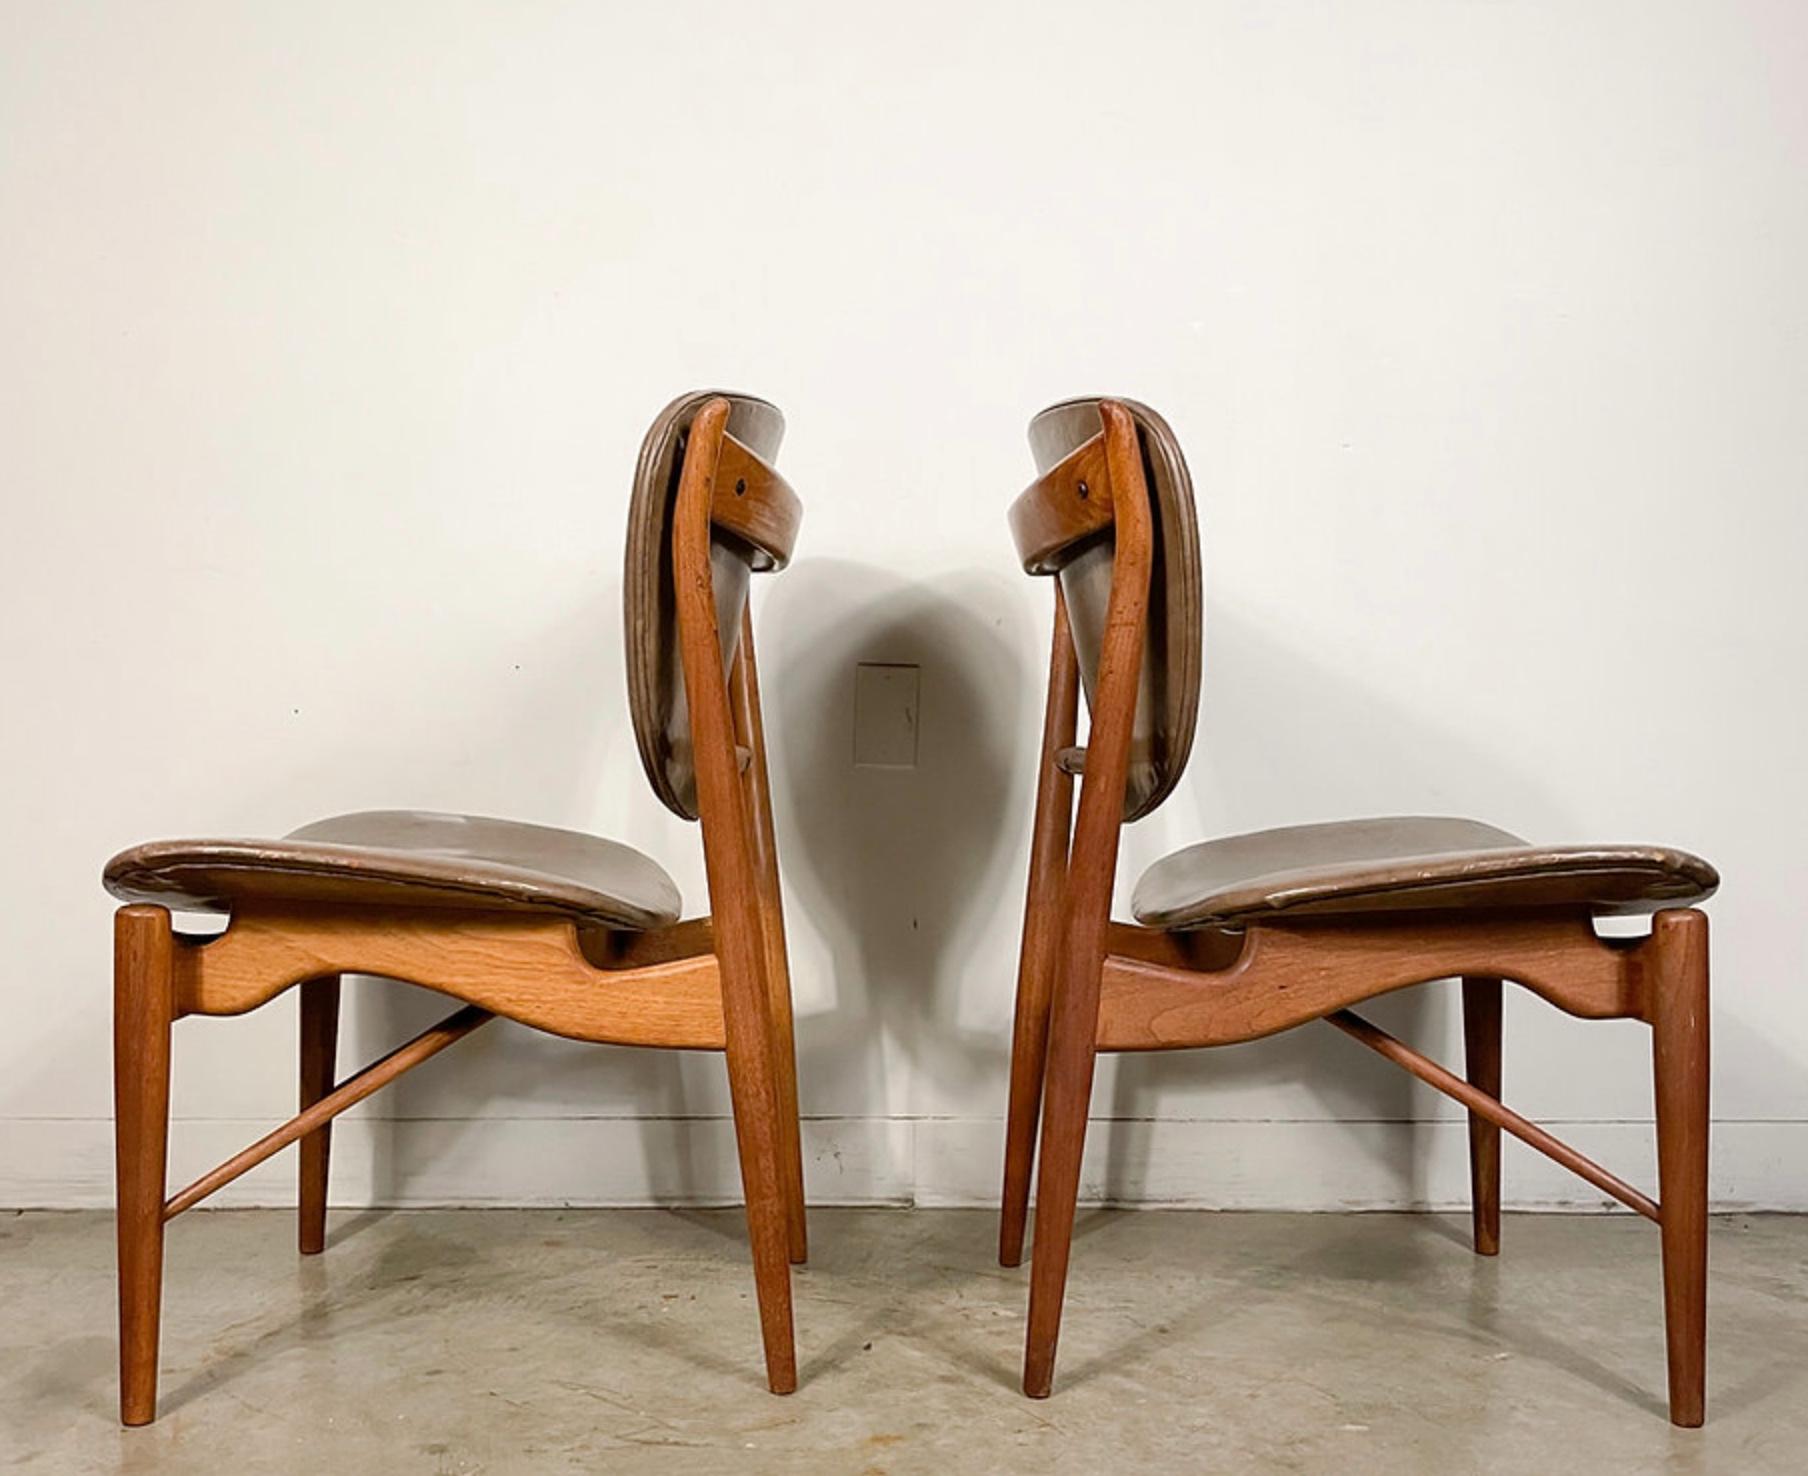 This pair of beautiful Finn Juhl Model 51 Chairs were made by Baker Furniture circa 1952 for the Baker Modern line. They offer solid walnut frames with distinctive 'horns', undulating curves, and dynamic angled stretchers. Both chairs feature